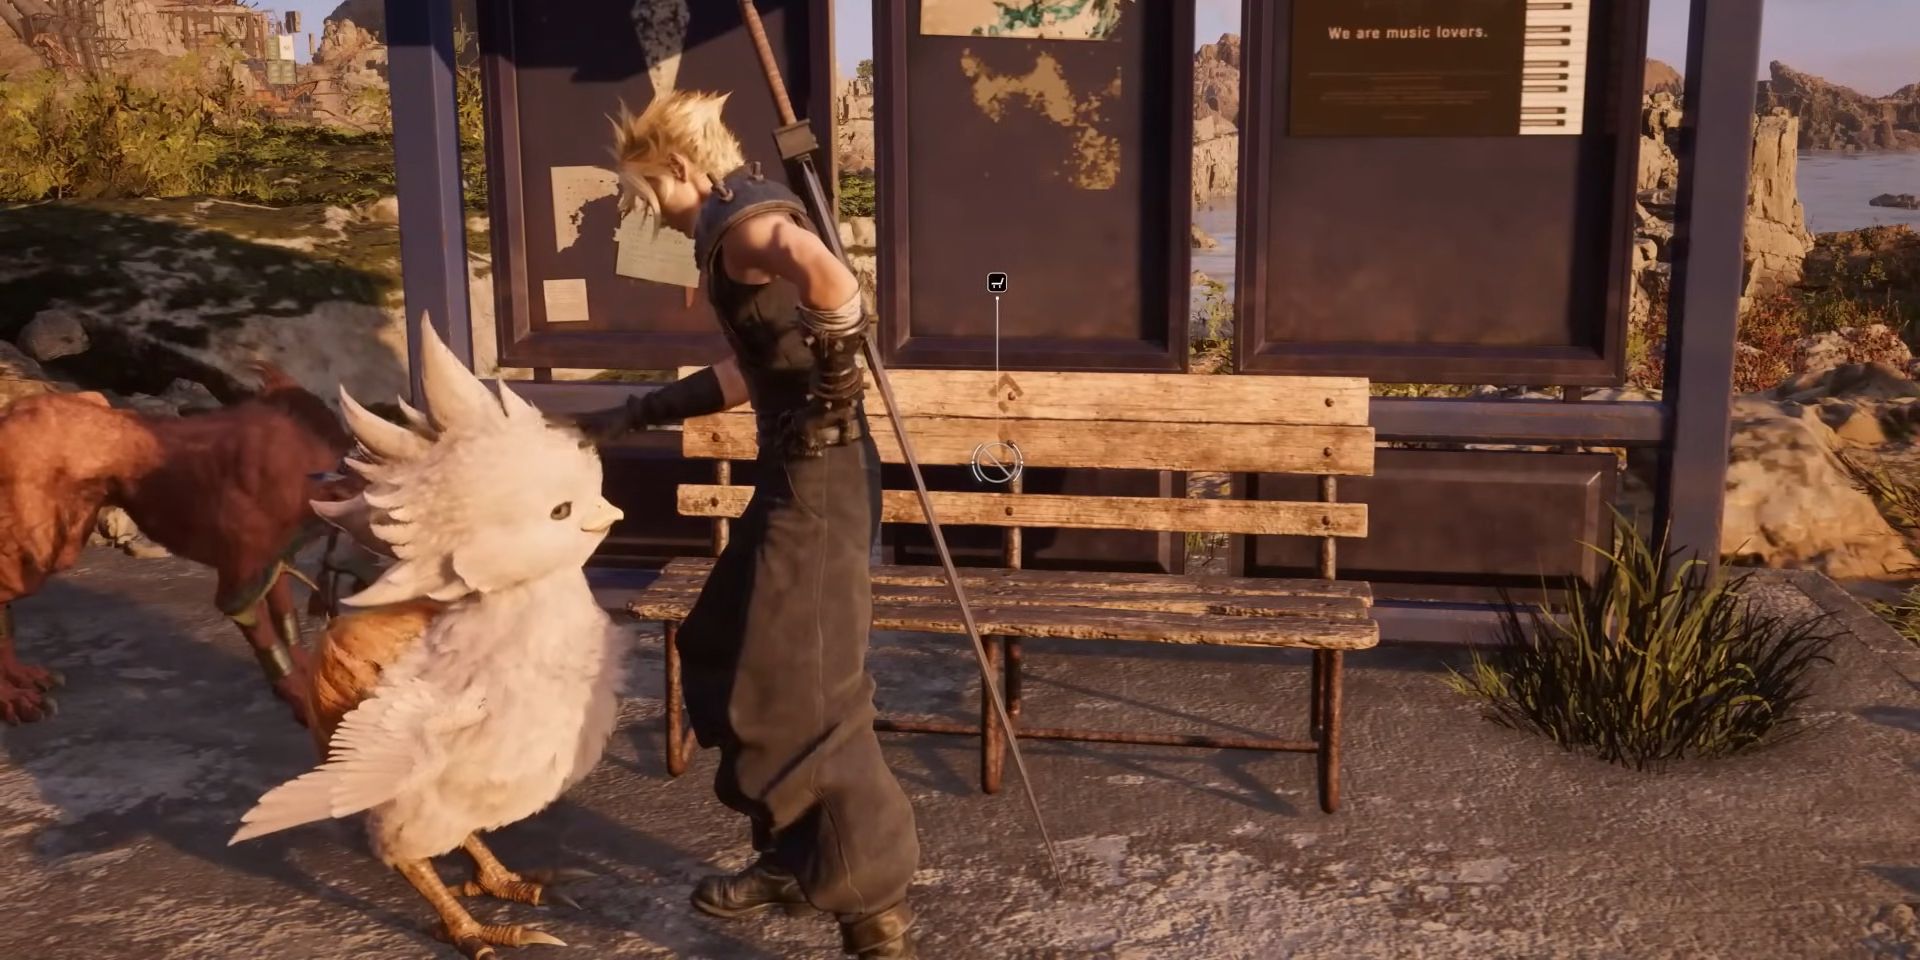 Cloud pets a baby Chocobo in Aruuu's video preview of Final Fantasy 7 Rebirth.